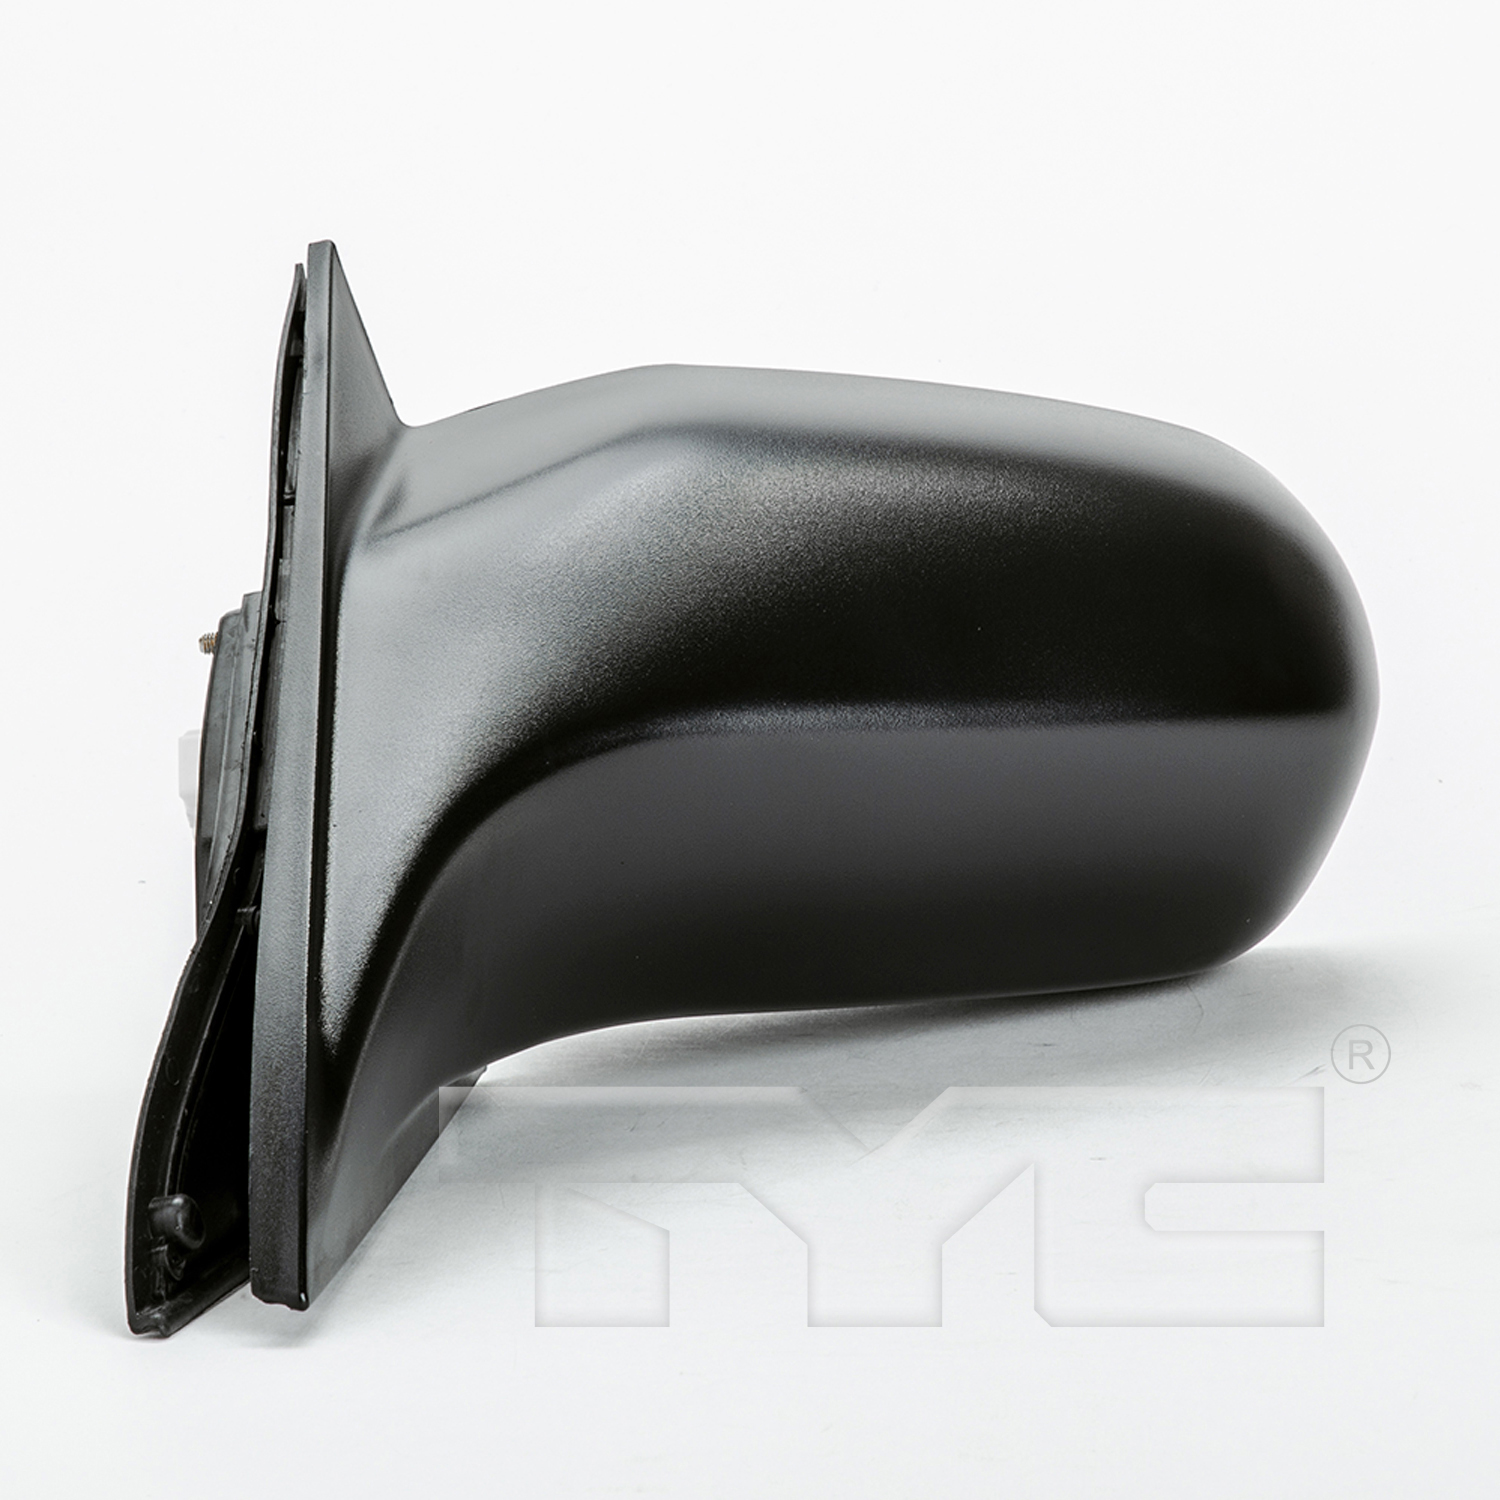 Aftermarket MIRRORS for HONDA - CIVIC, CIVIC,01-05,LT Mirror outside rear view